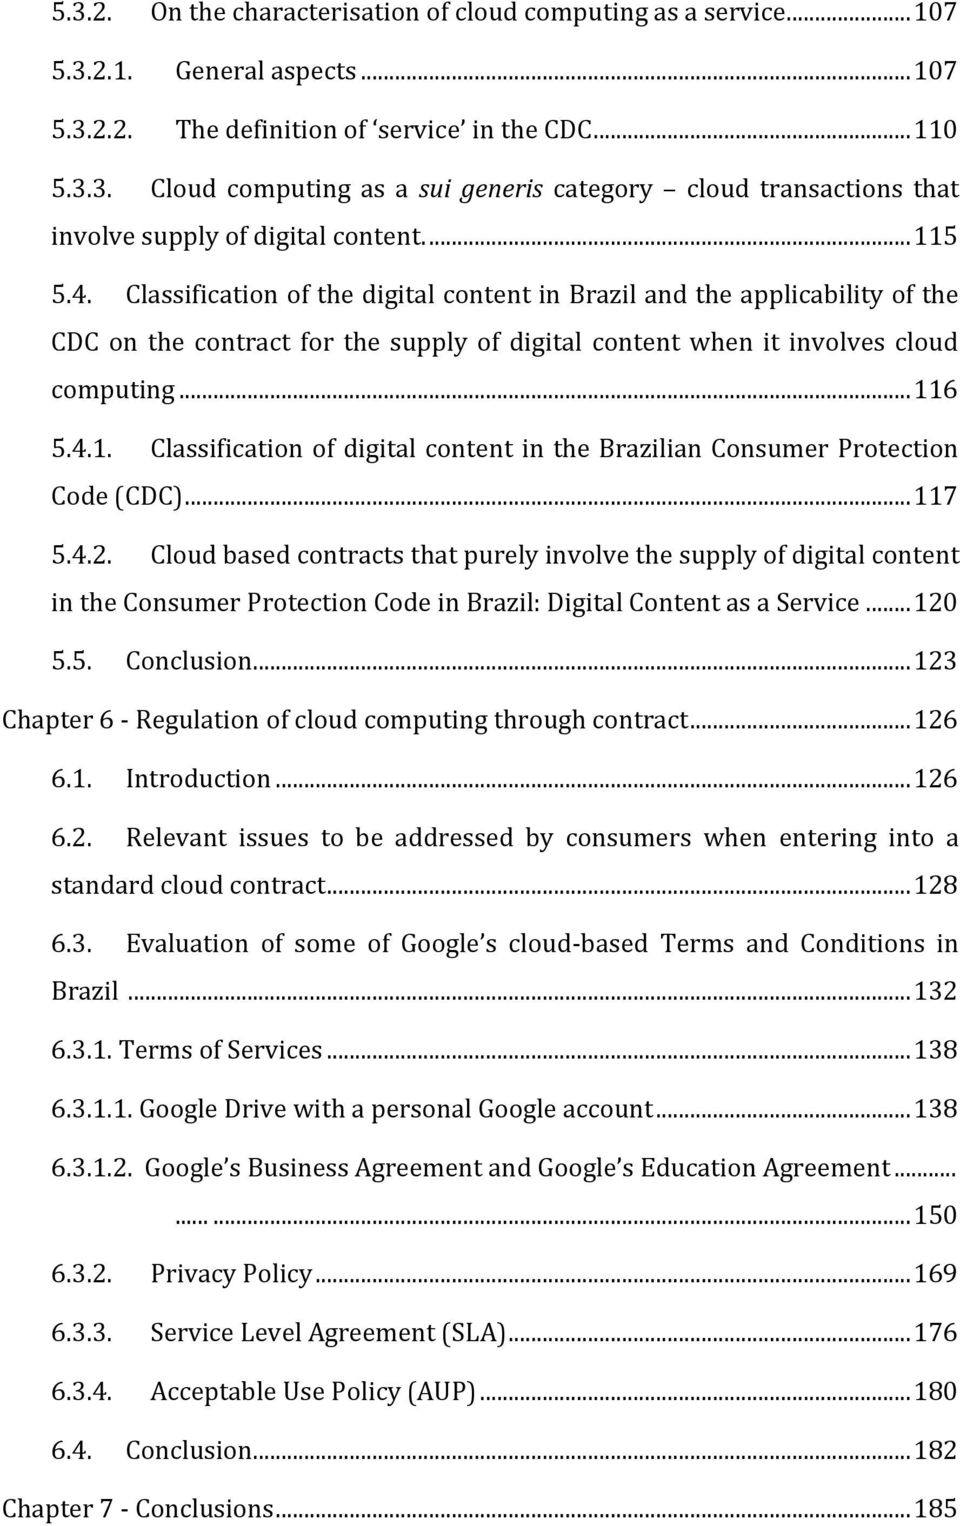 .. 117 5.4.2. Cloud based contracts that purely involve the supply of digital content in the Consumer Protection Code in Brazil: Digital Content as a Service... 120 5.5. Conclusion.